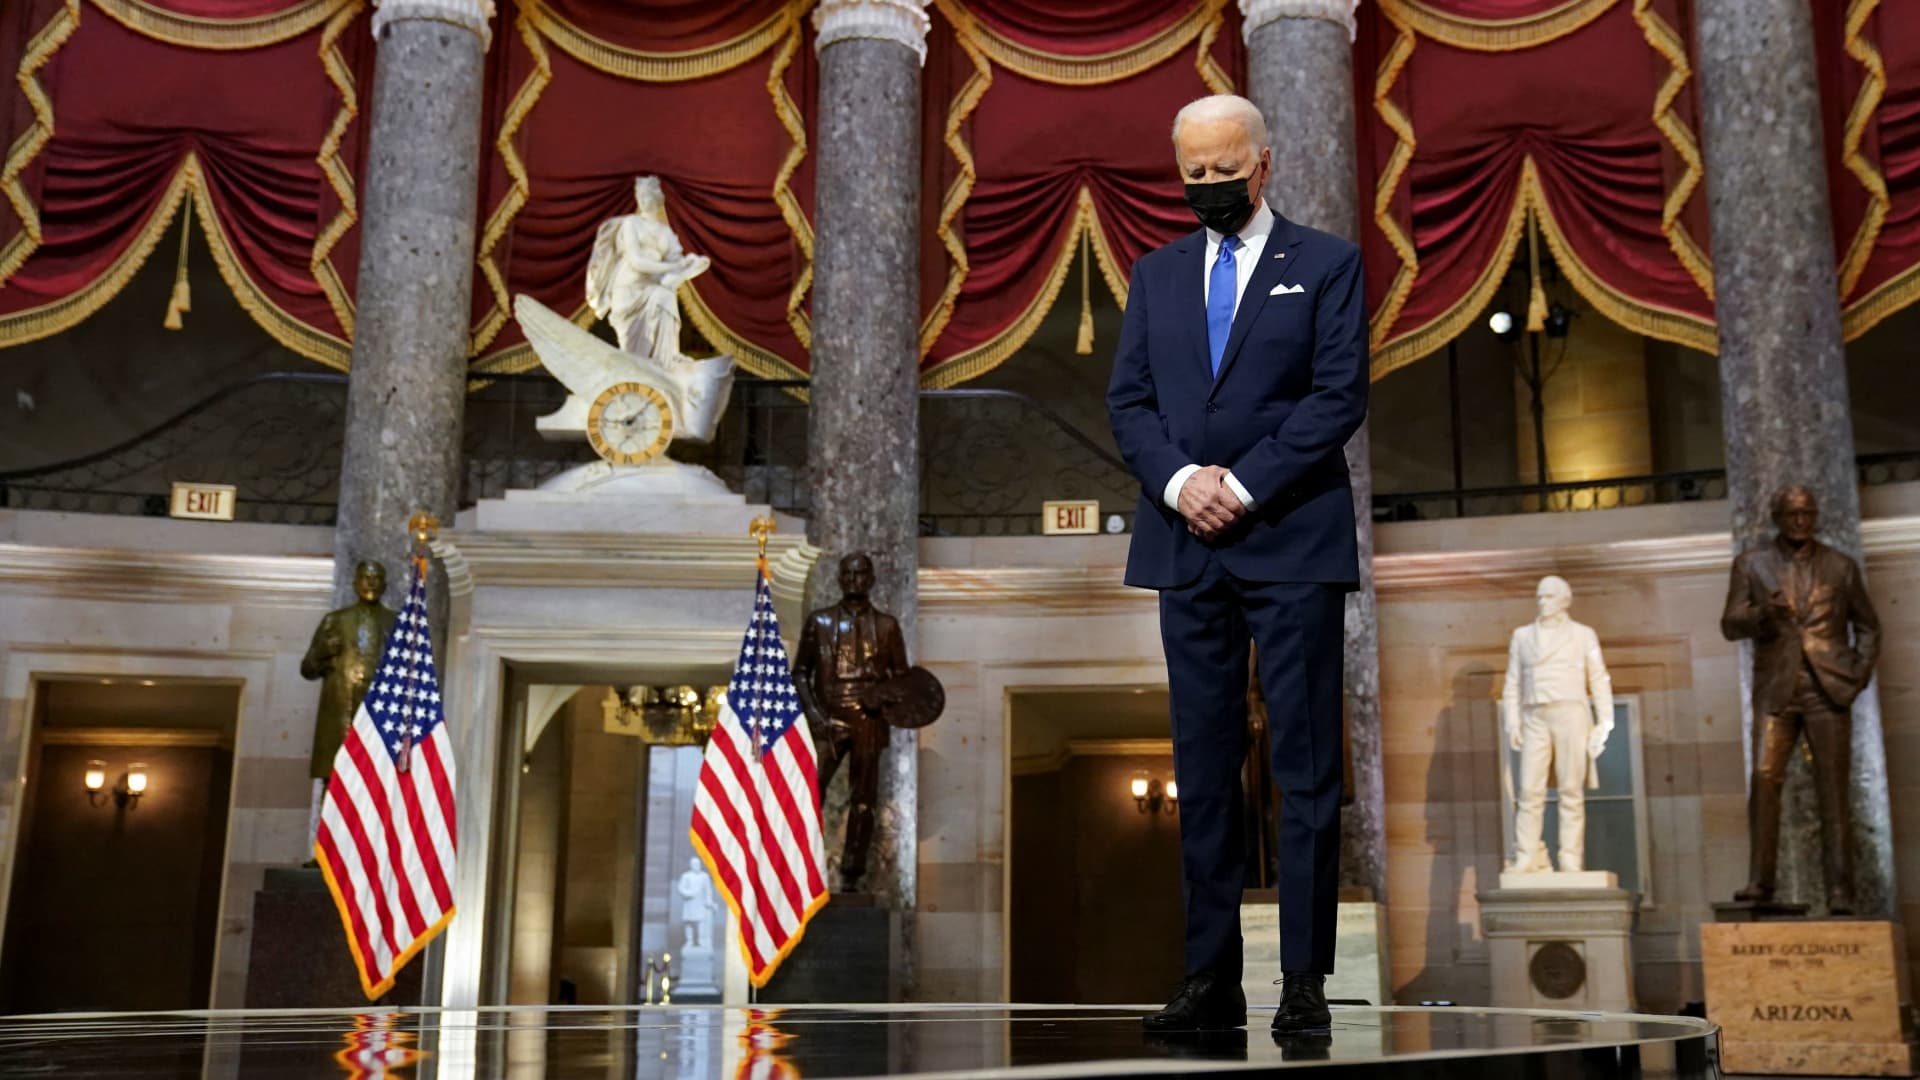 U.S. President Joe Biden attends an event in Statuary Hall on the first anniversary of the January 6, 2021 attack on the U.S. Capitol by supporters of former President Donald Trump, on Capitol Hill in Washington, U.S., January 6, 2022.